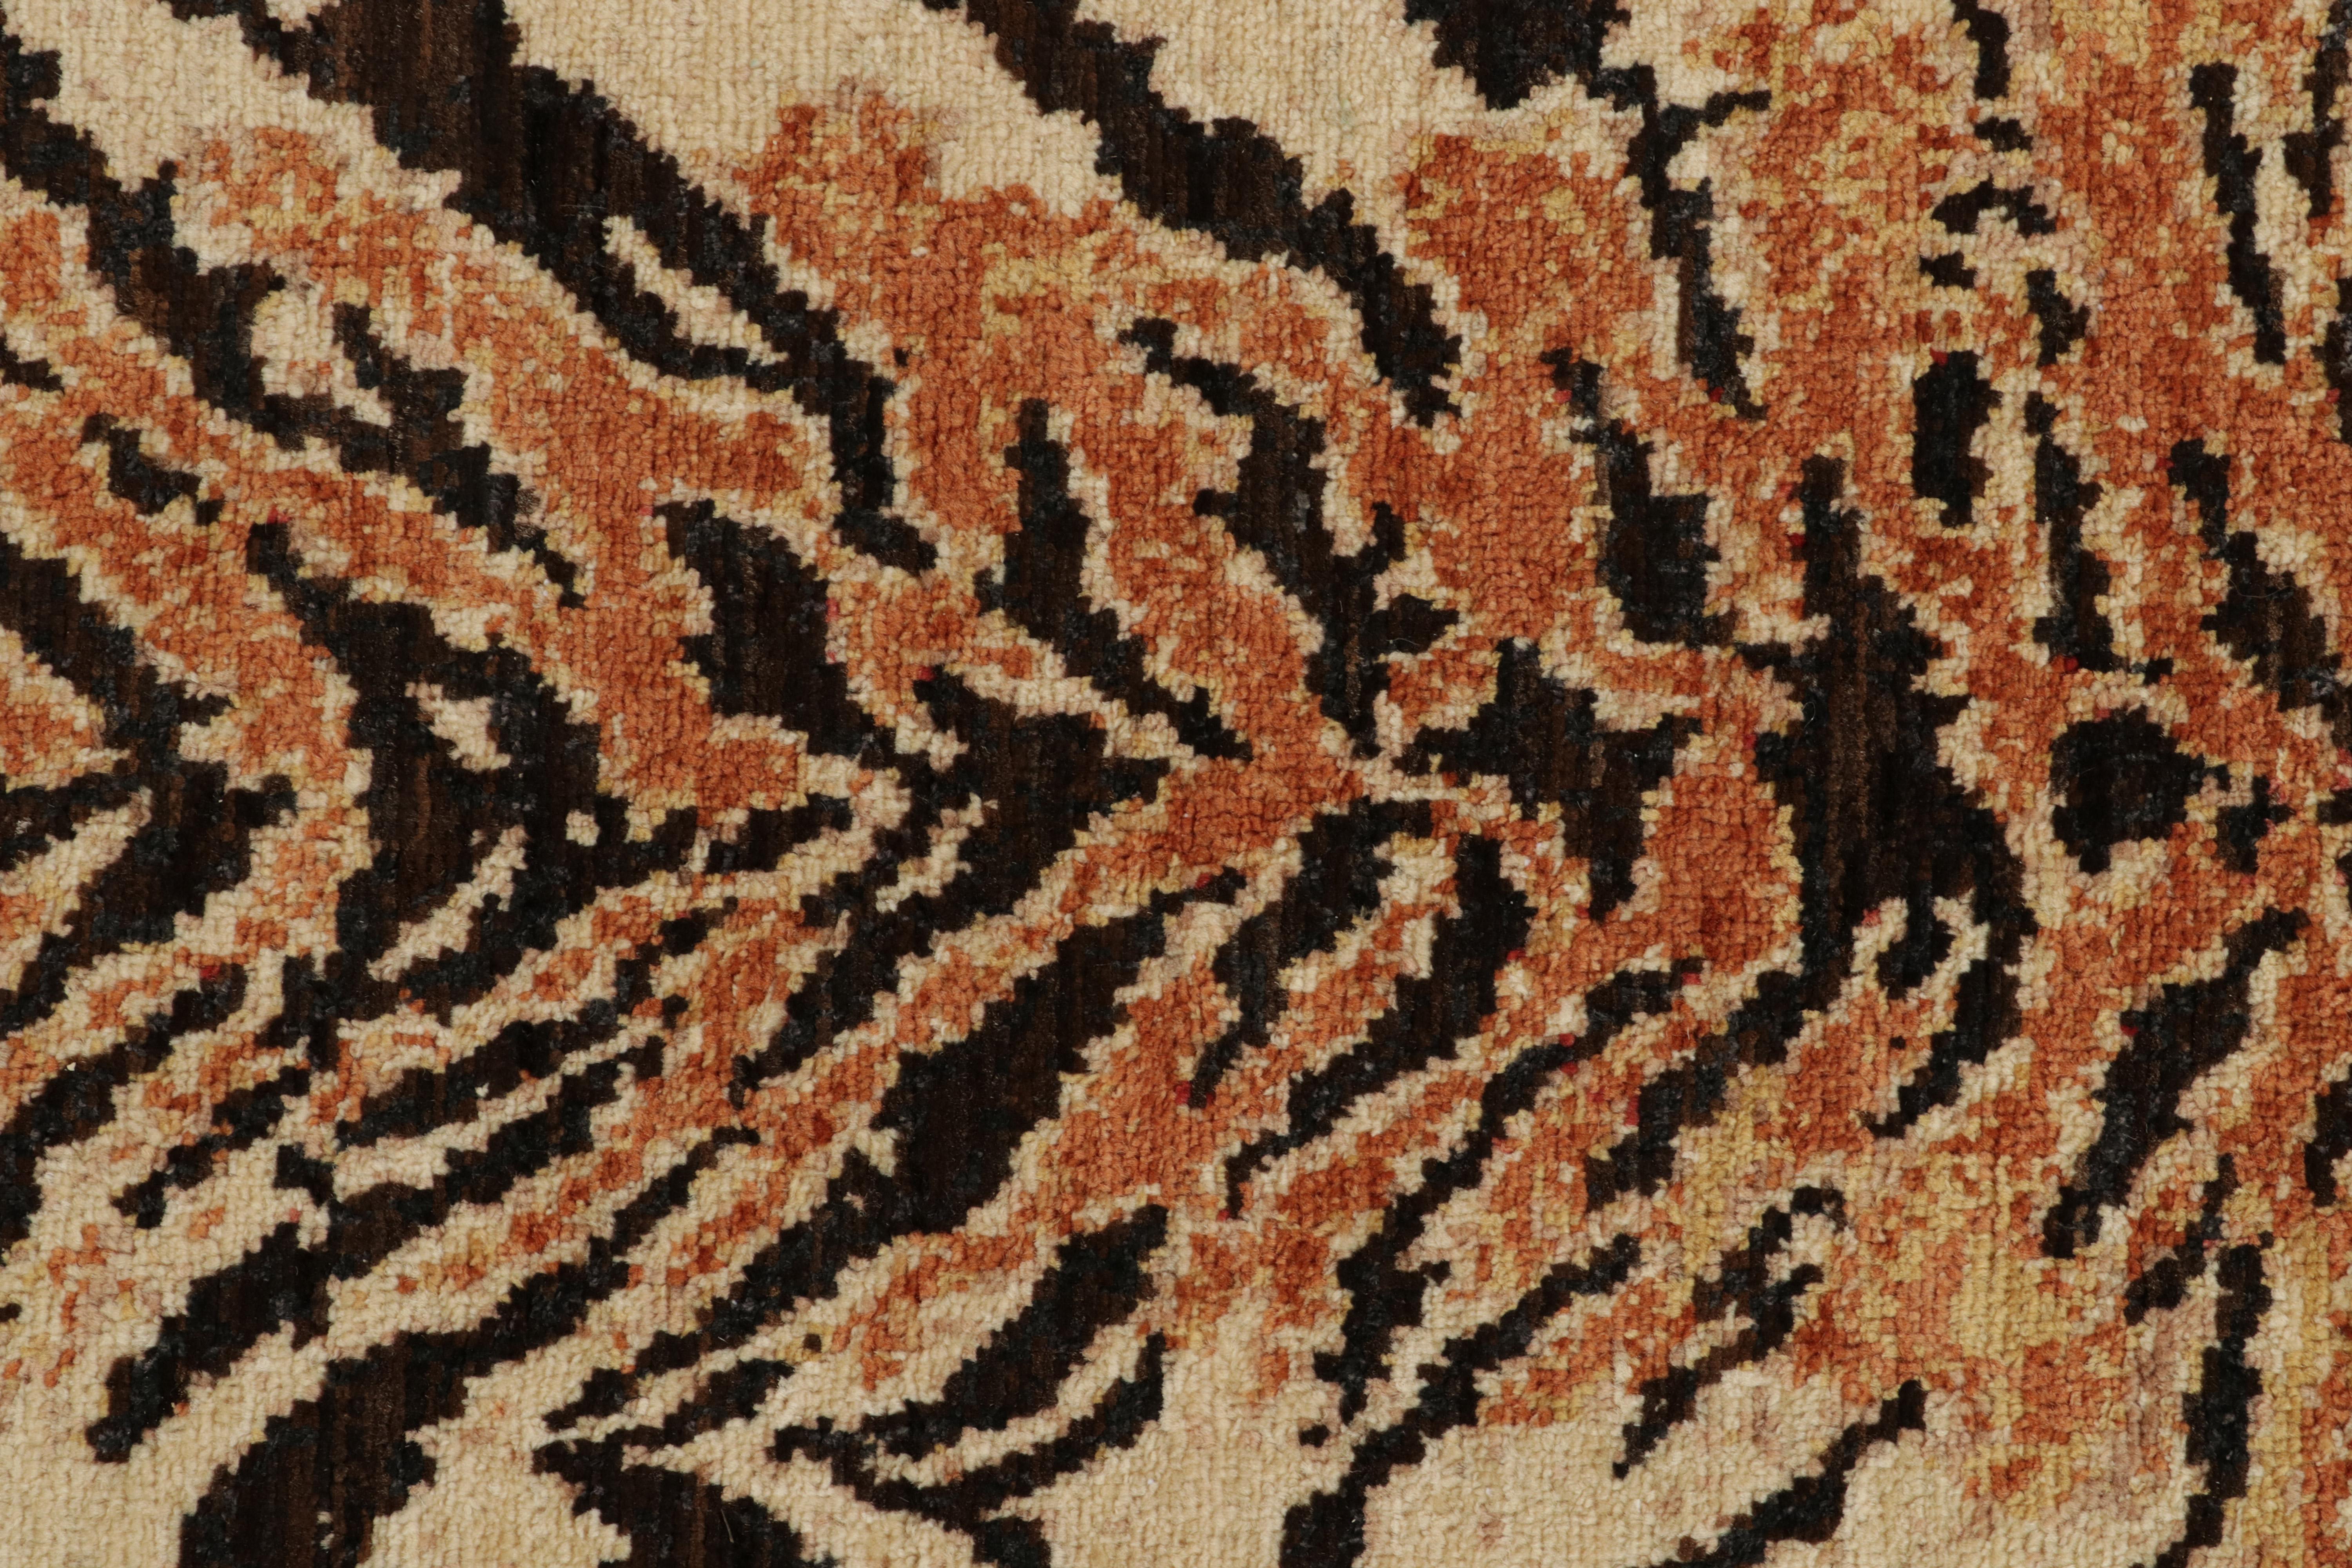 Hand-Knotted Rug & Kilim’s Pictorial Tiger Skin Rug in Red, Beige-Brown and Orange